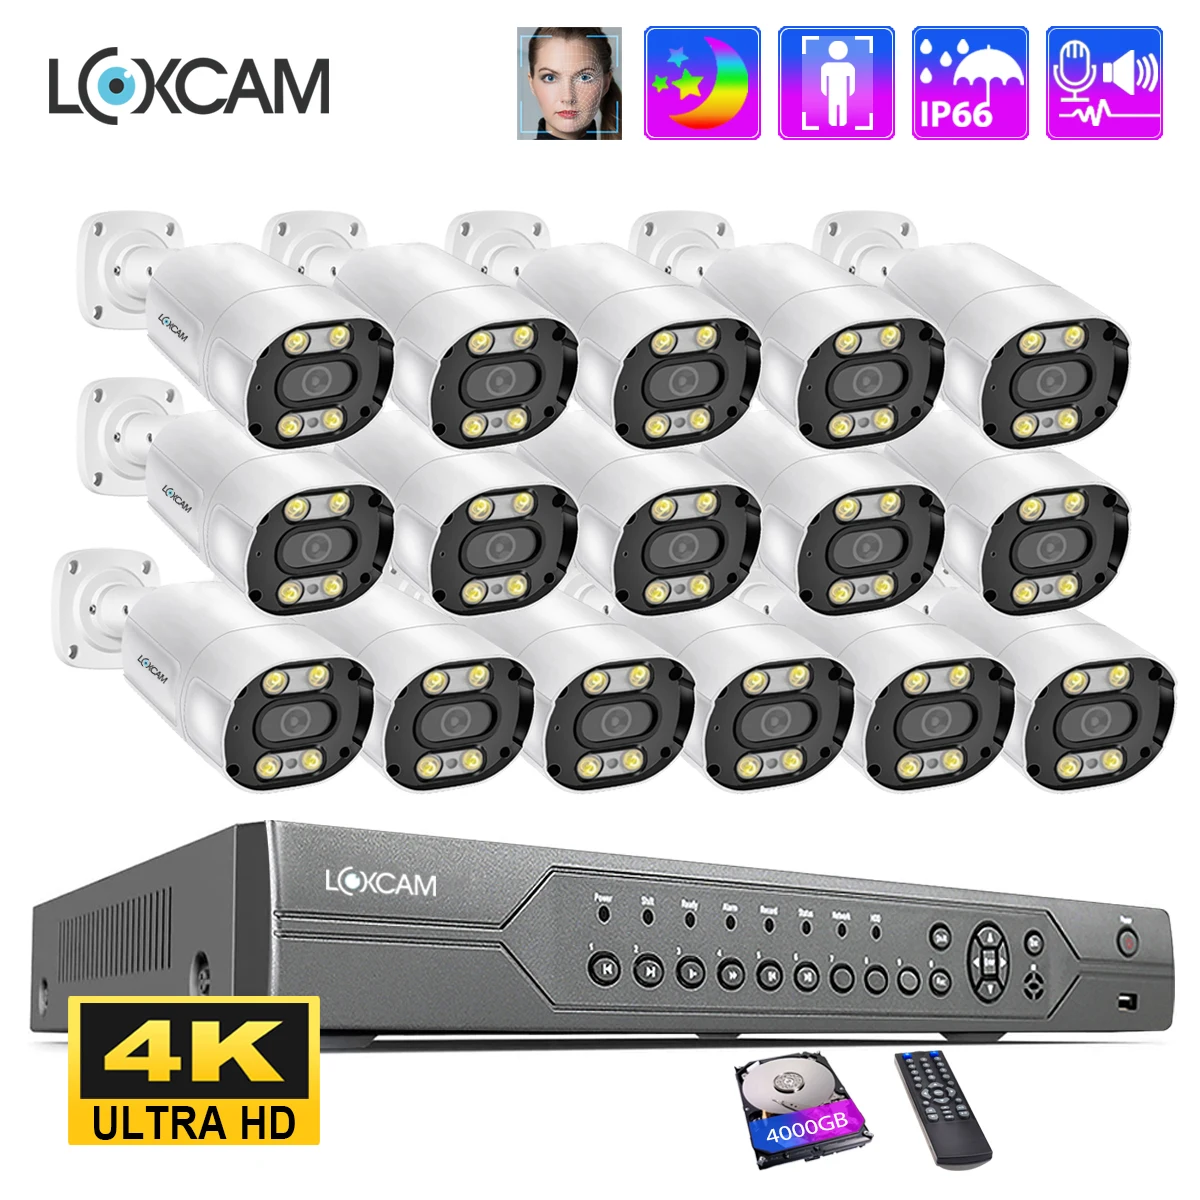 

LOXCAM 4K POE Security Camera System 16CH NVR Kit 8MP Ai Face Human Detect Outdoor 4MP Two Way Audio Video Surveillance Set